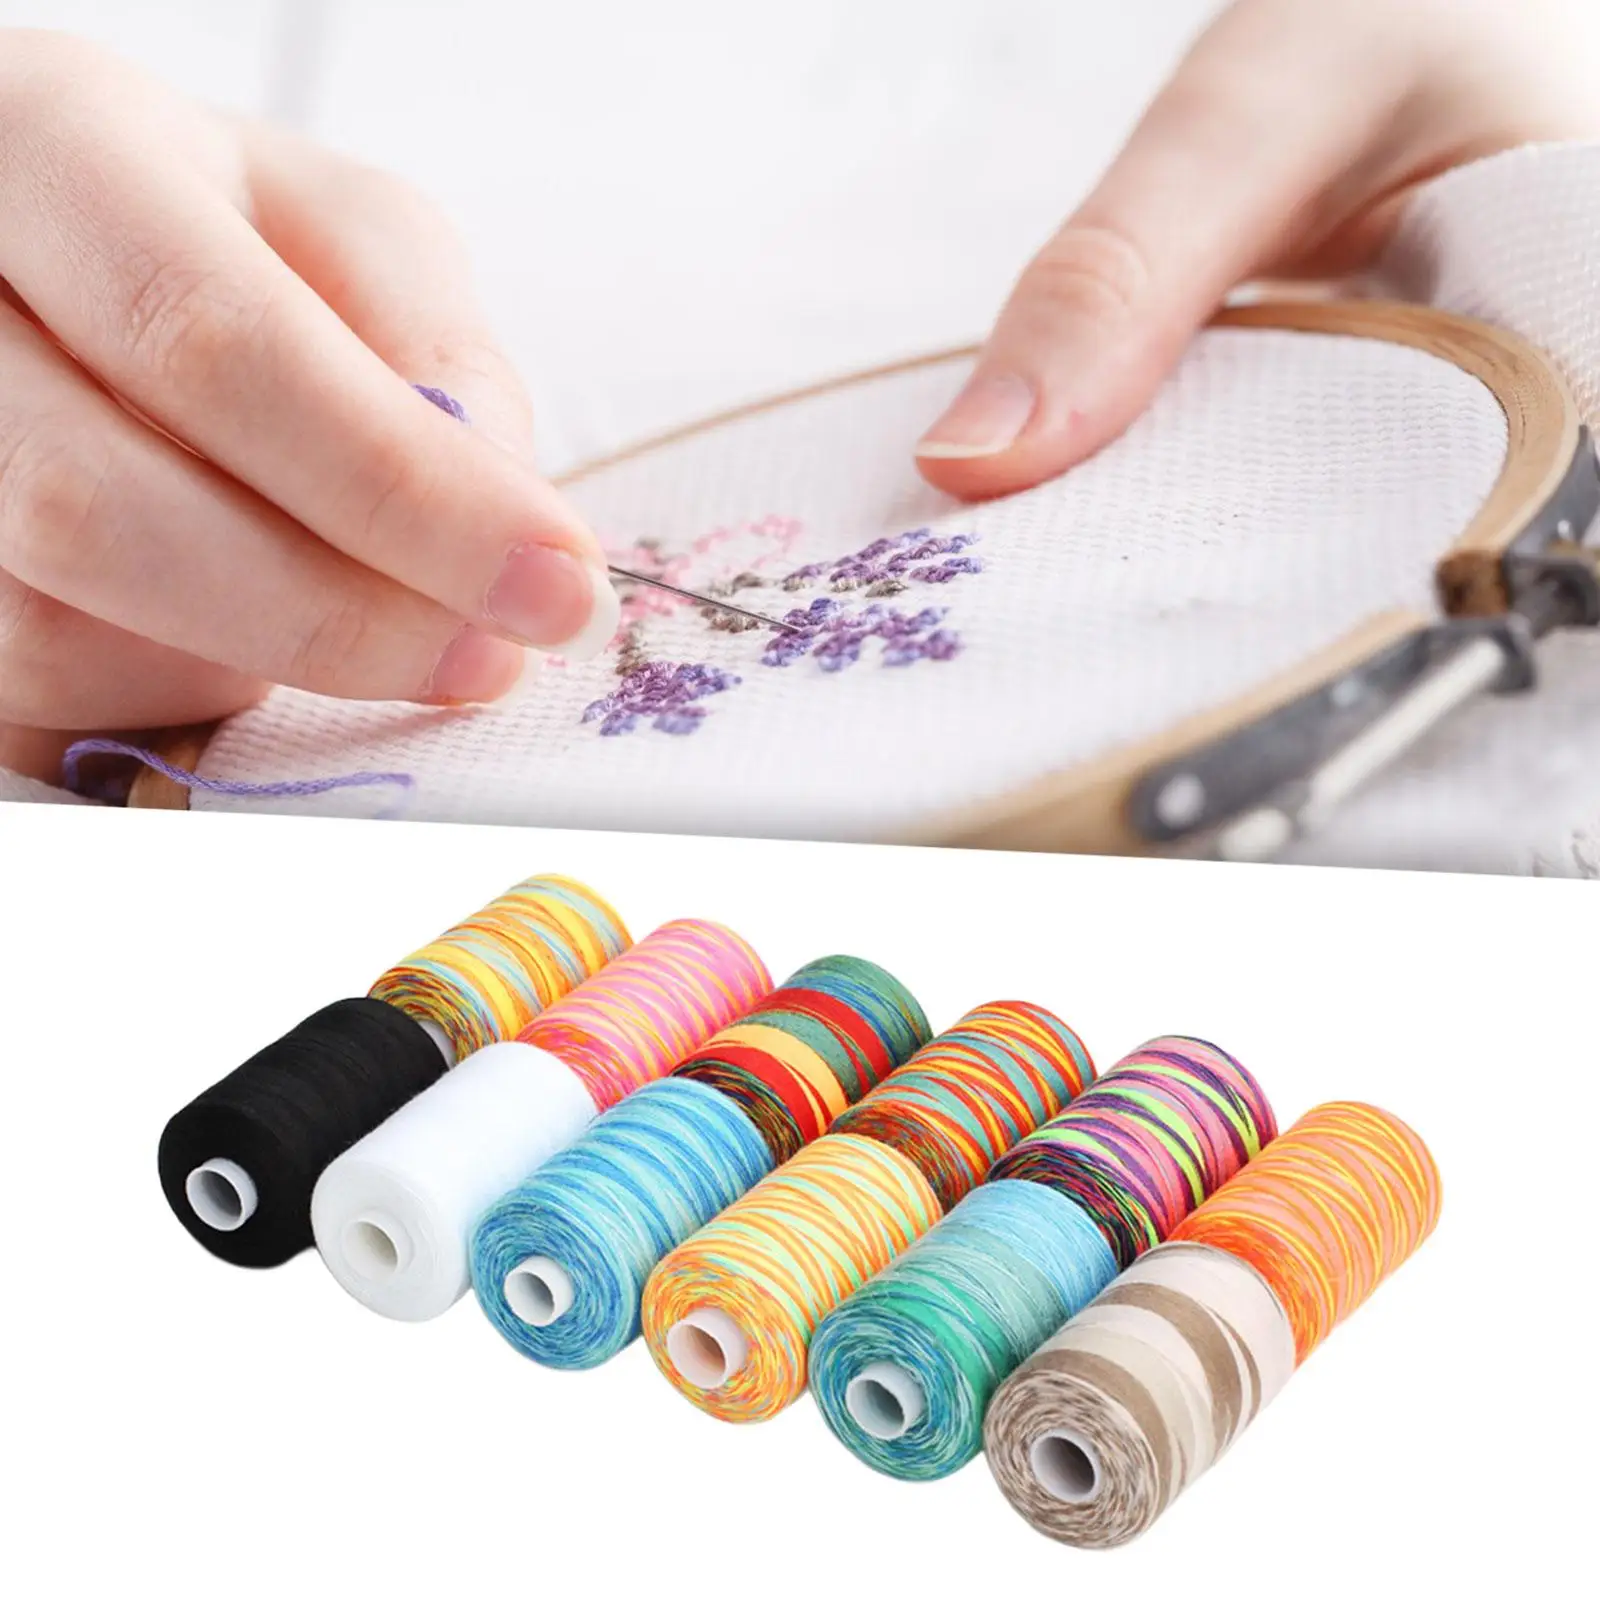 12Pcs Multicolor Sewing Thread Set Durable All Purpose Prewound Bobbin Thread for Sewing Cross Stitching DIY Crafts Supplies